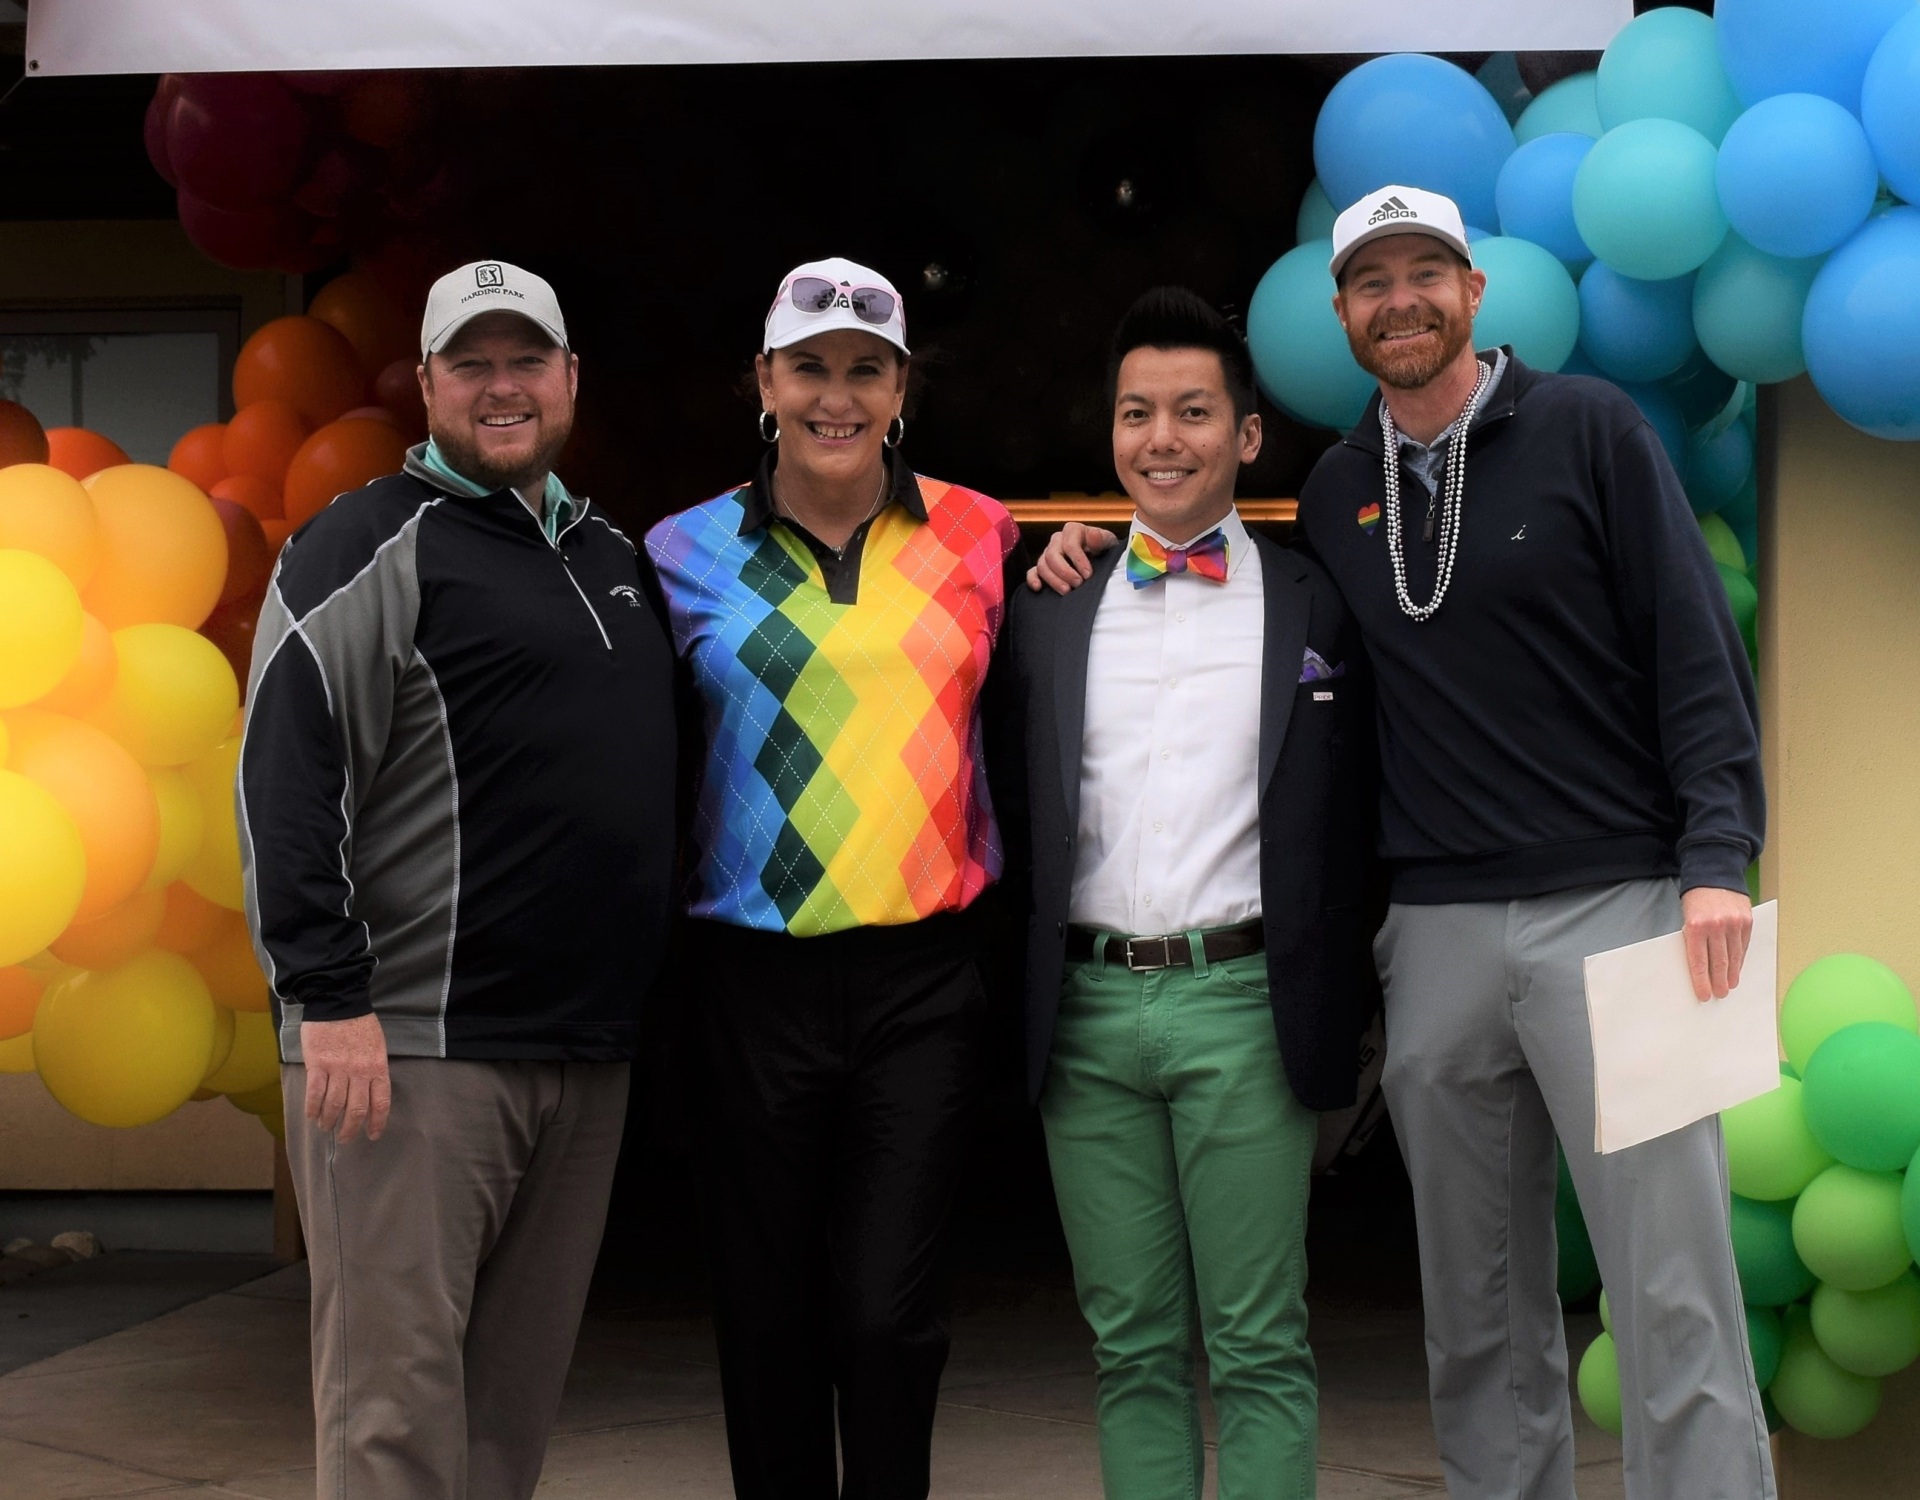 The Institute Golf Club Head Golf Professional Greg Fitzgerald with colleagues at the Inaugural San Francisco Pride Pro-Am at Harding Park